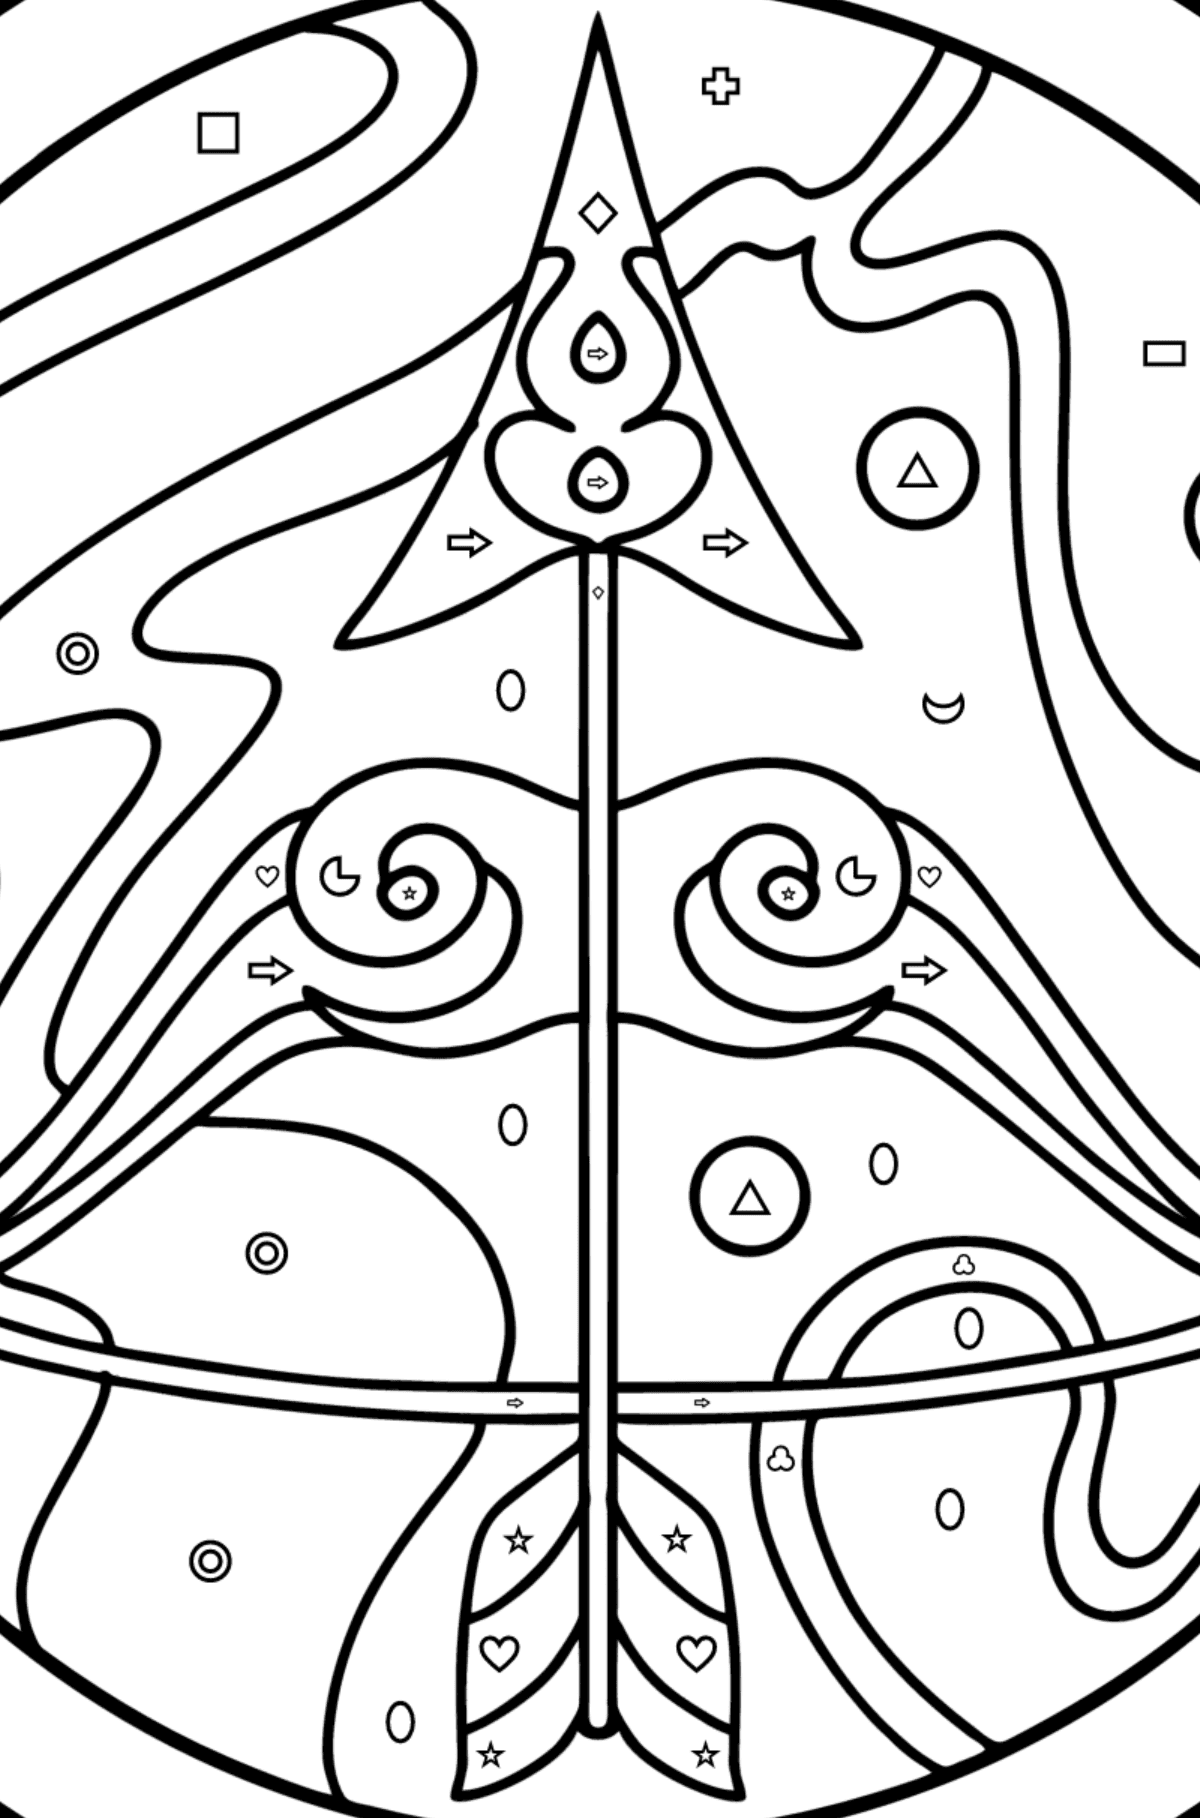 Coloring page for kids - zodiac sign Sagittarius - Coloring by Geometric Shapes for Kids